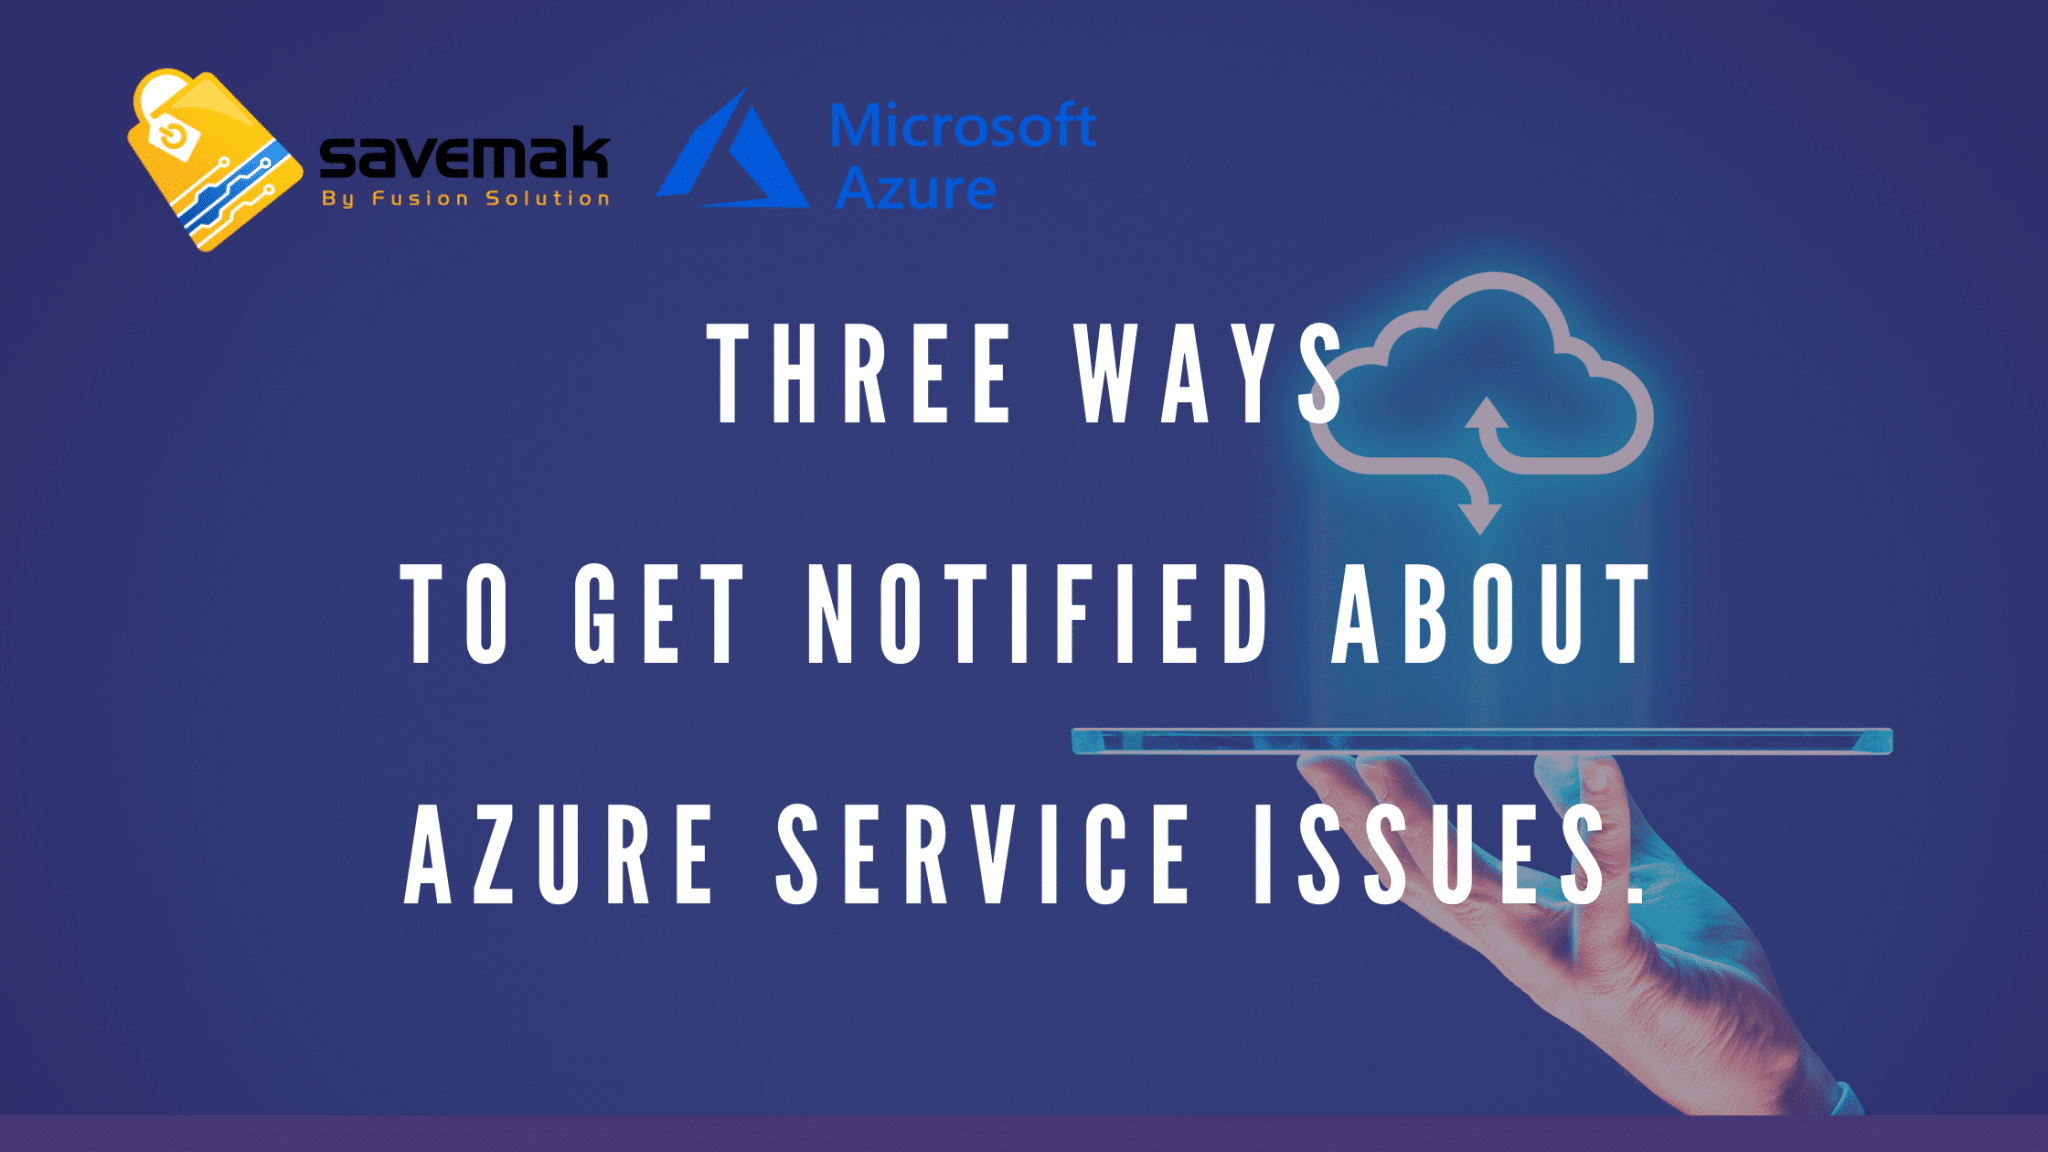 Three ways to get notified about Azure service issues